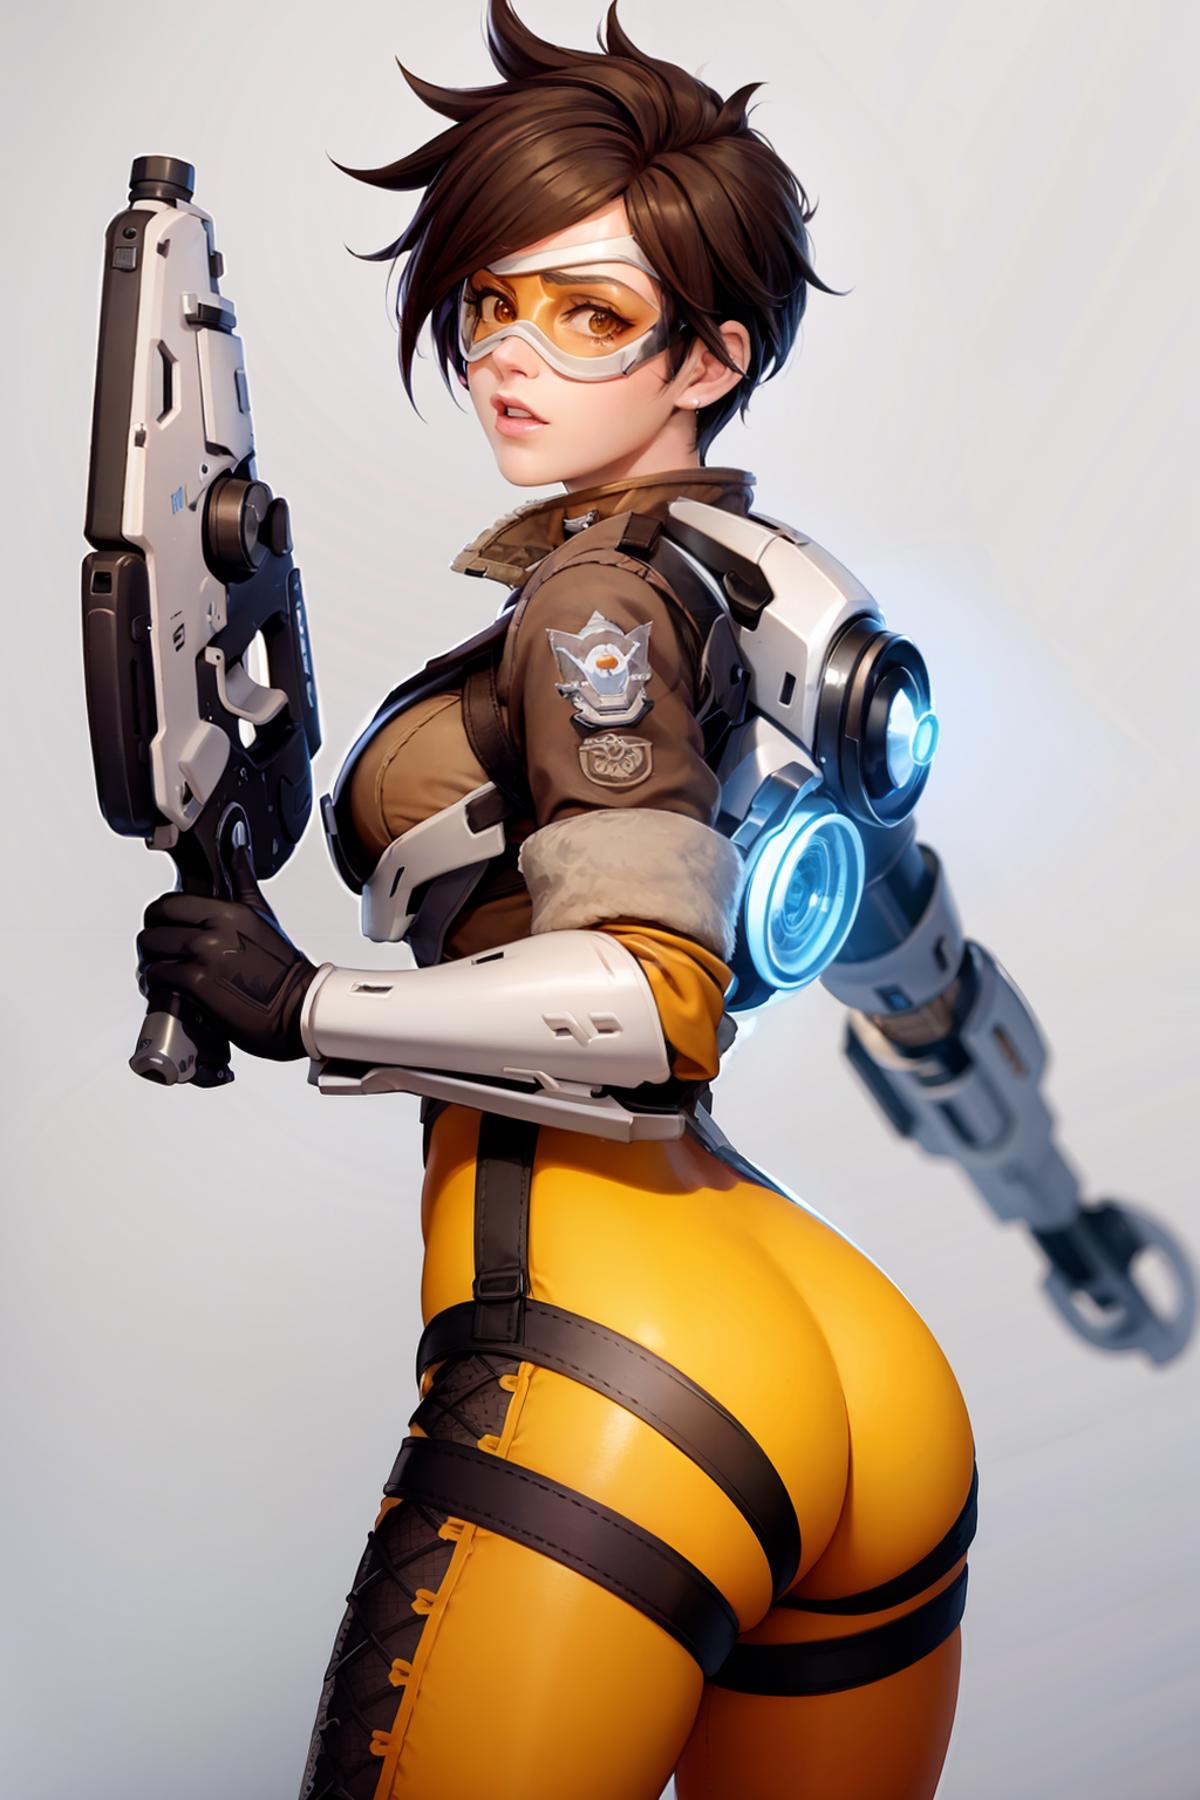 tracer (overwatch) 猎空 守望先锋 - v1.0, Stable Diffusion LoRA